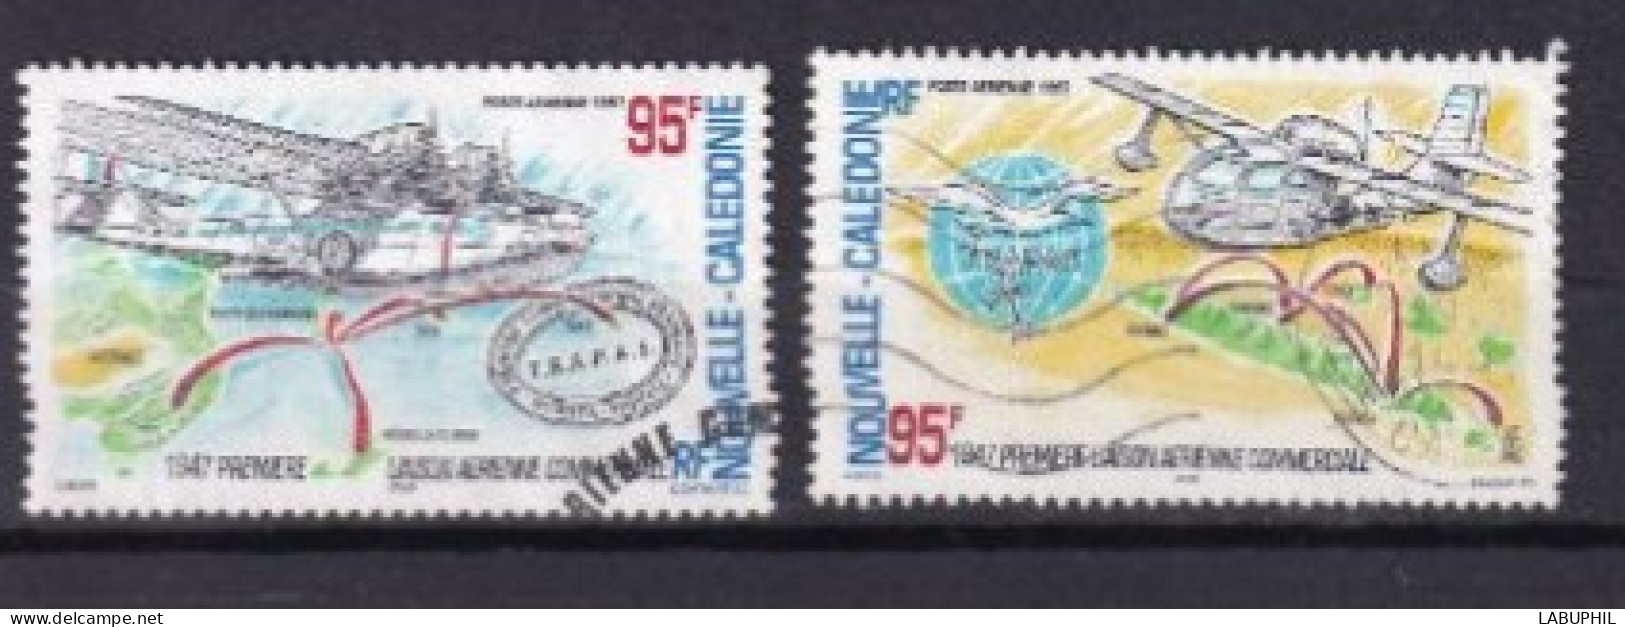 NOUVELLE CALEDONIE Dispersion D'une Collection Oblitéré Used   Poste Aerienne 1997 - Used Stamps